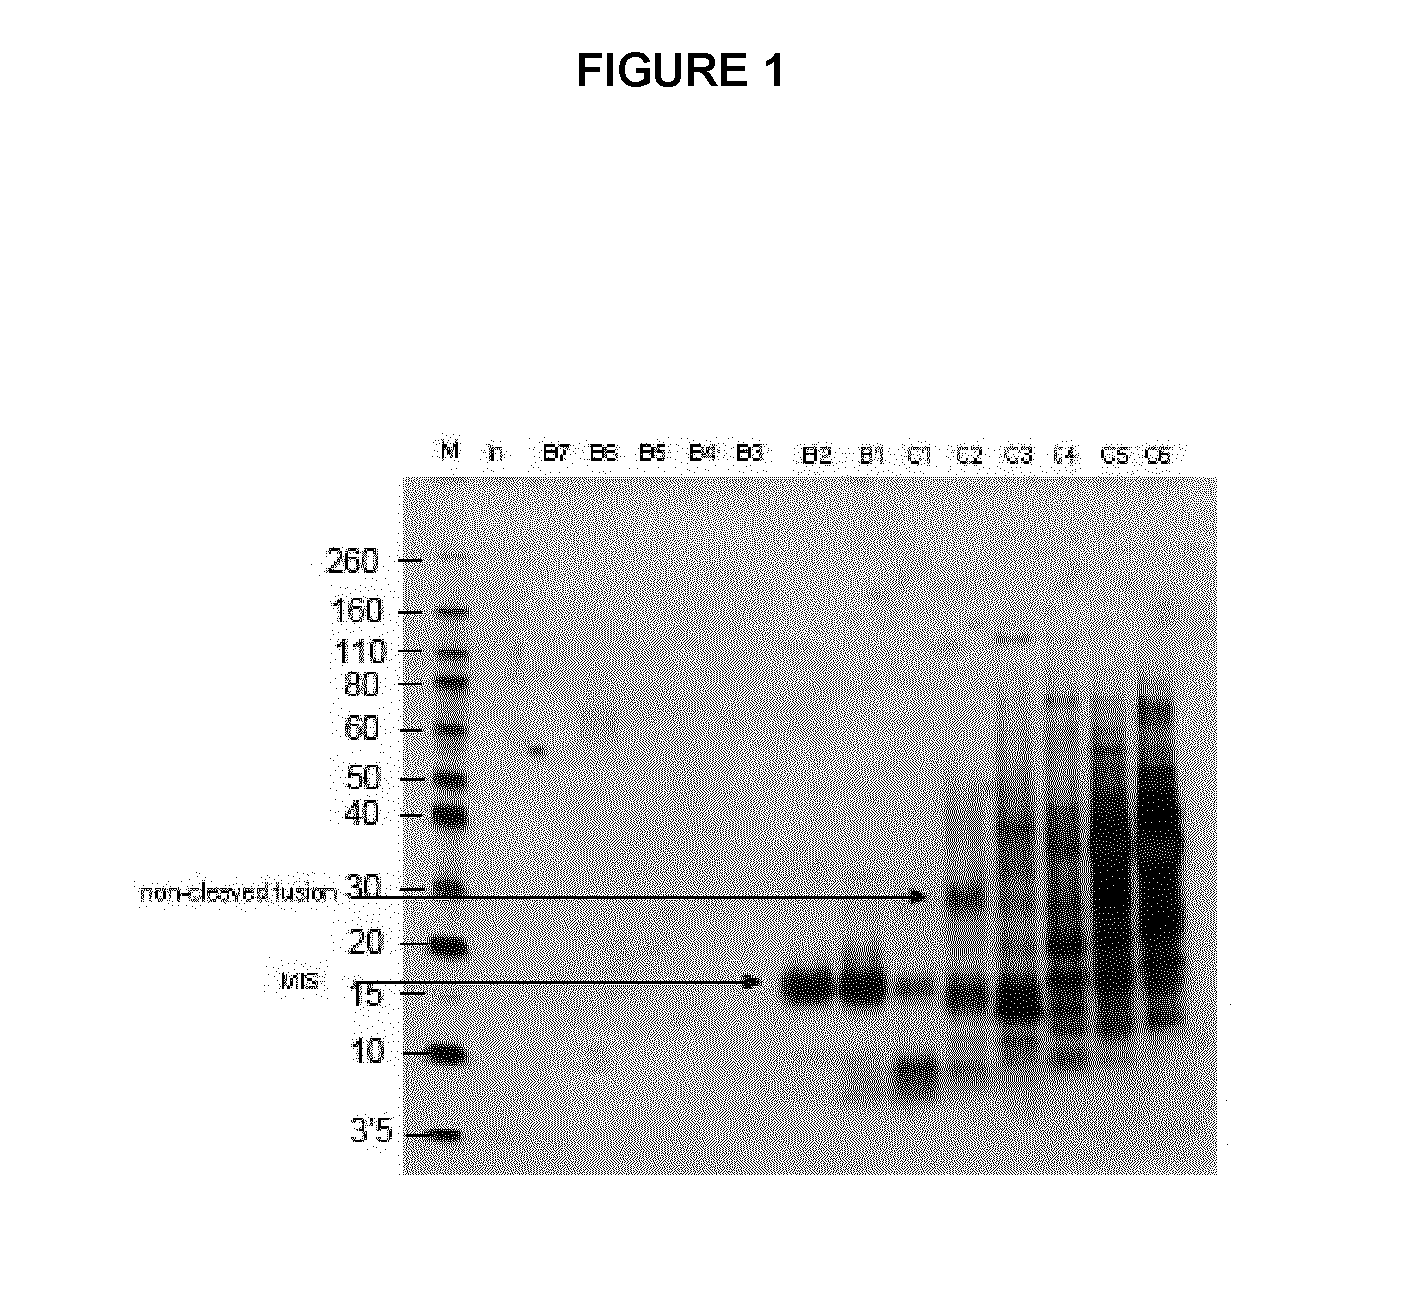 Method for producing mullerian inhibitor substance in plants